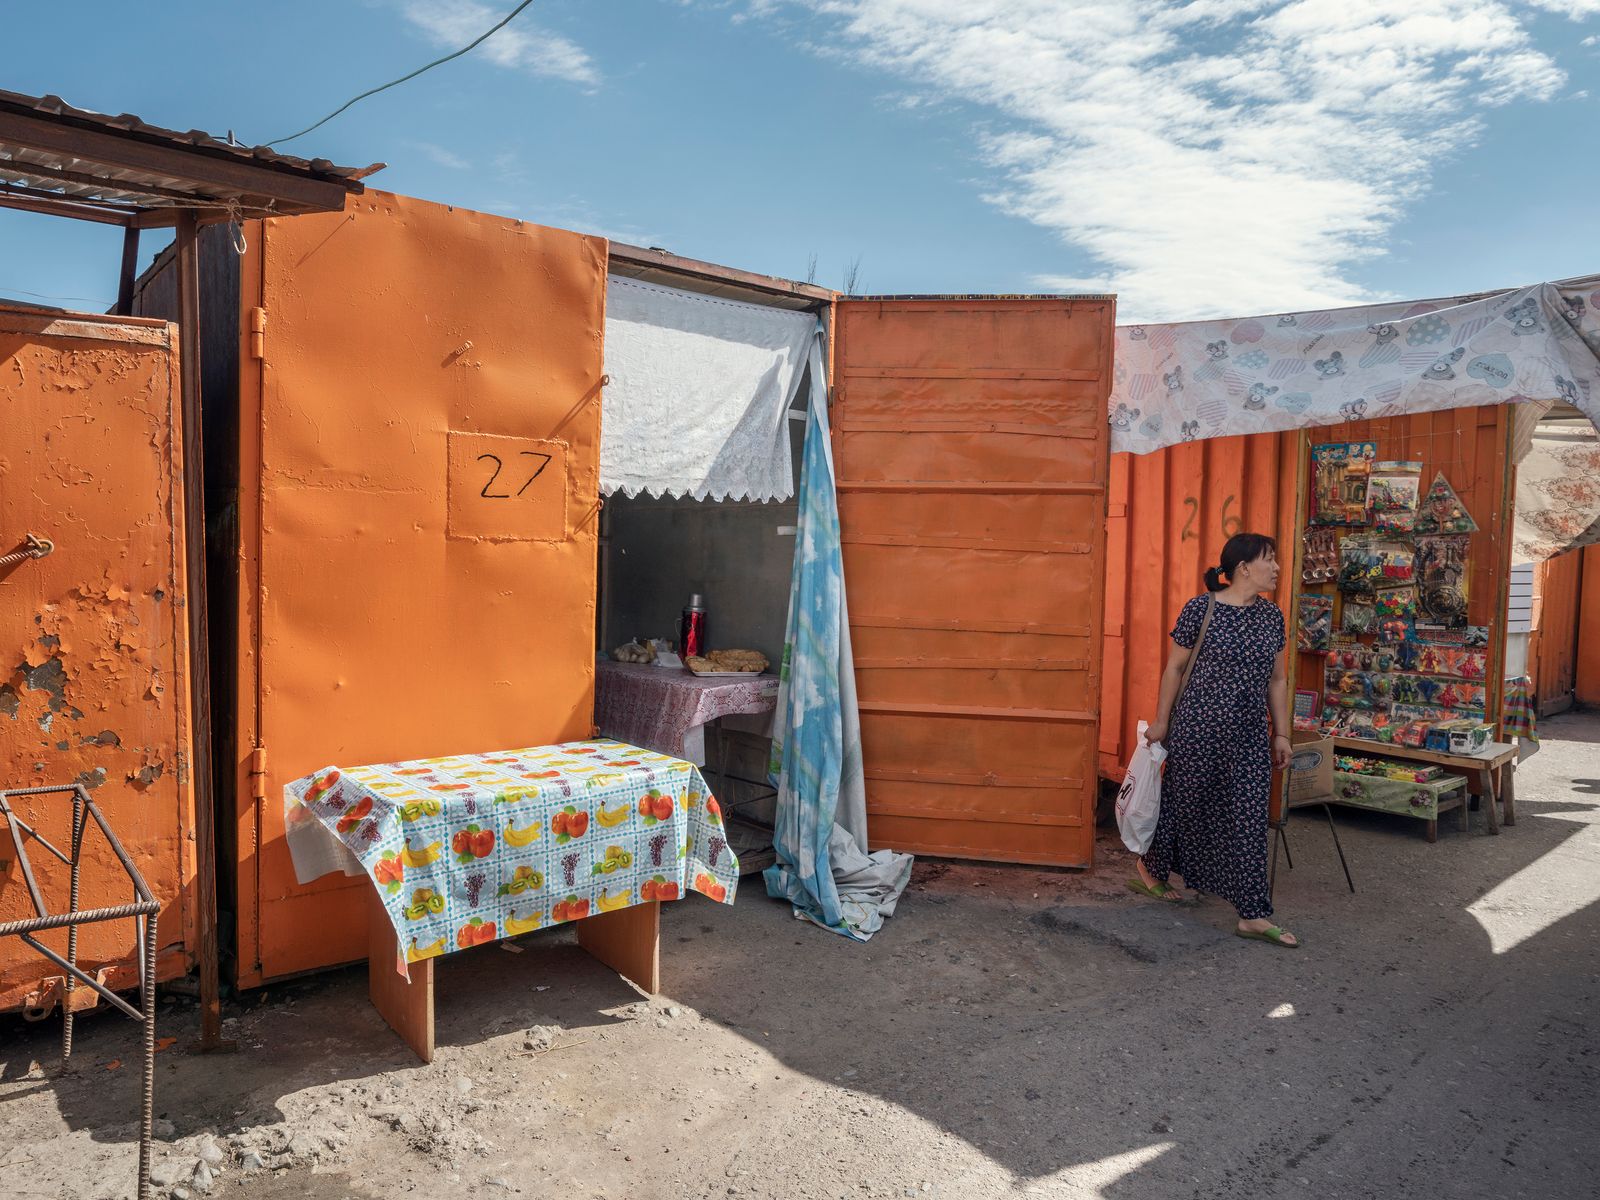 © Andrea Frazzetta - Zharkent’s colorful central market. Containers are refashioned as stalls and warehouses for inexpensive goods.